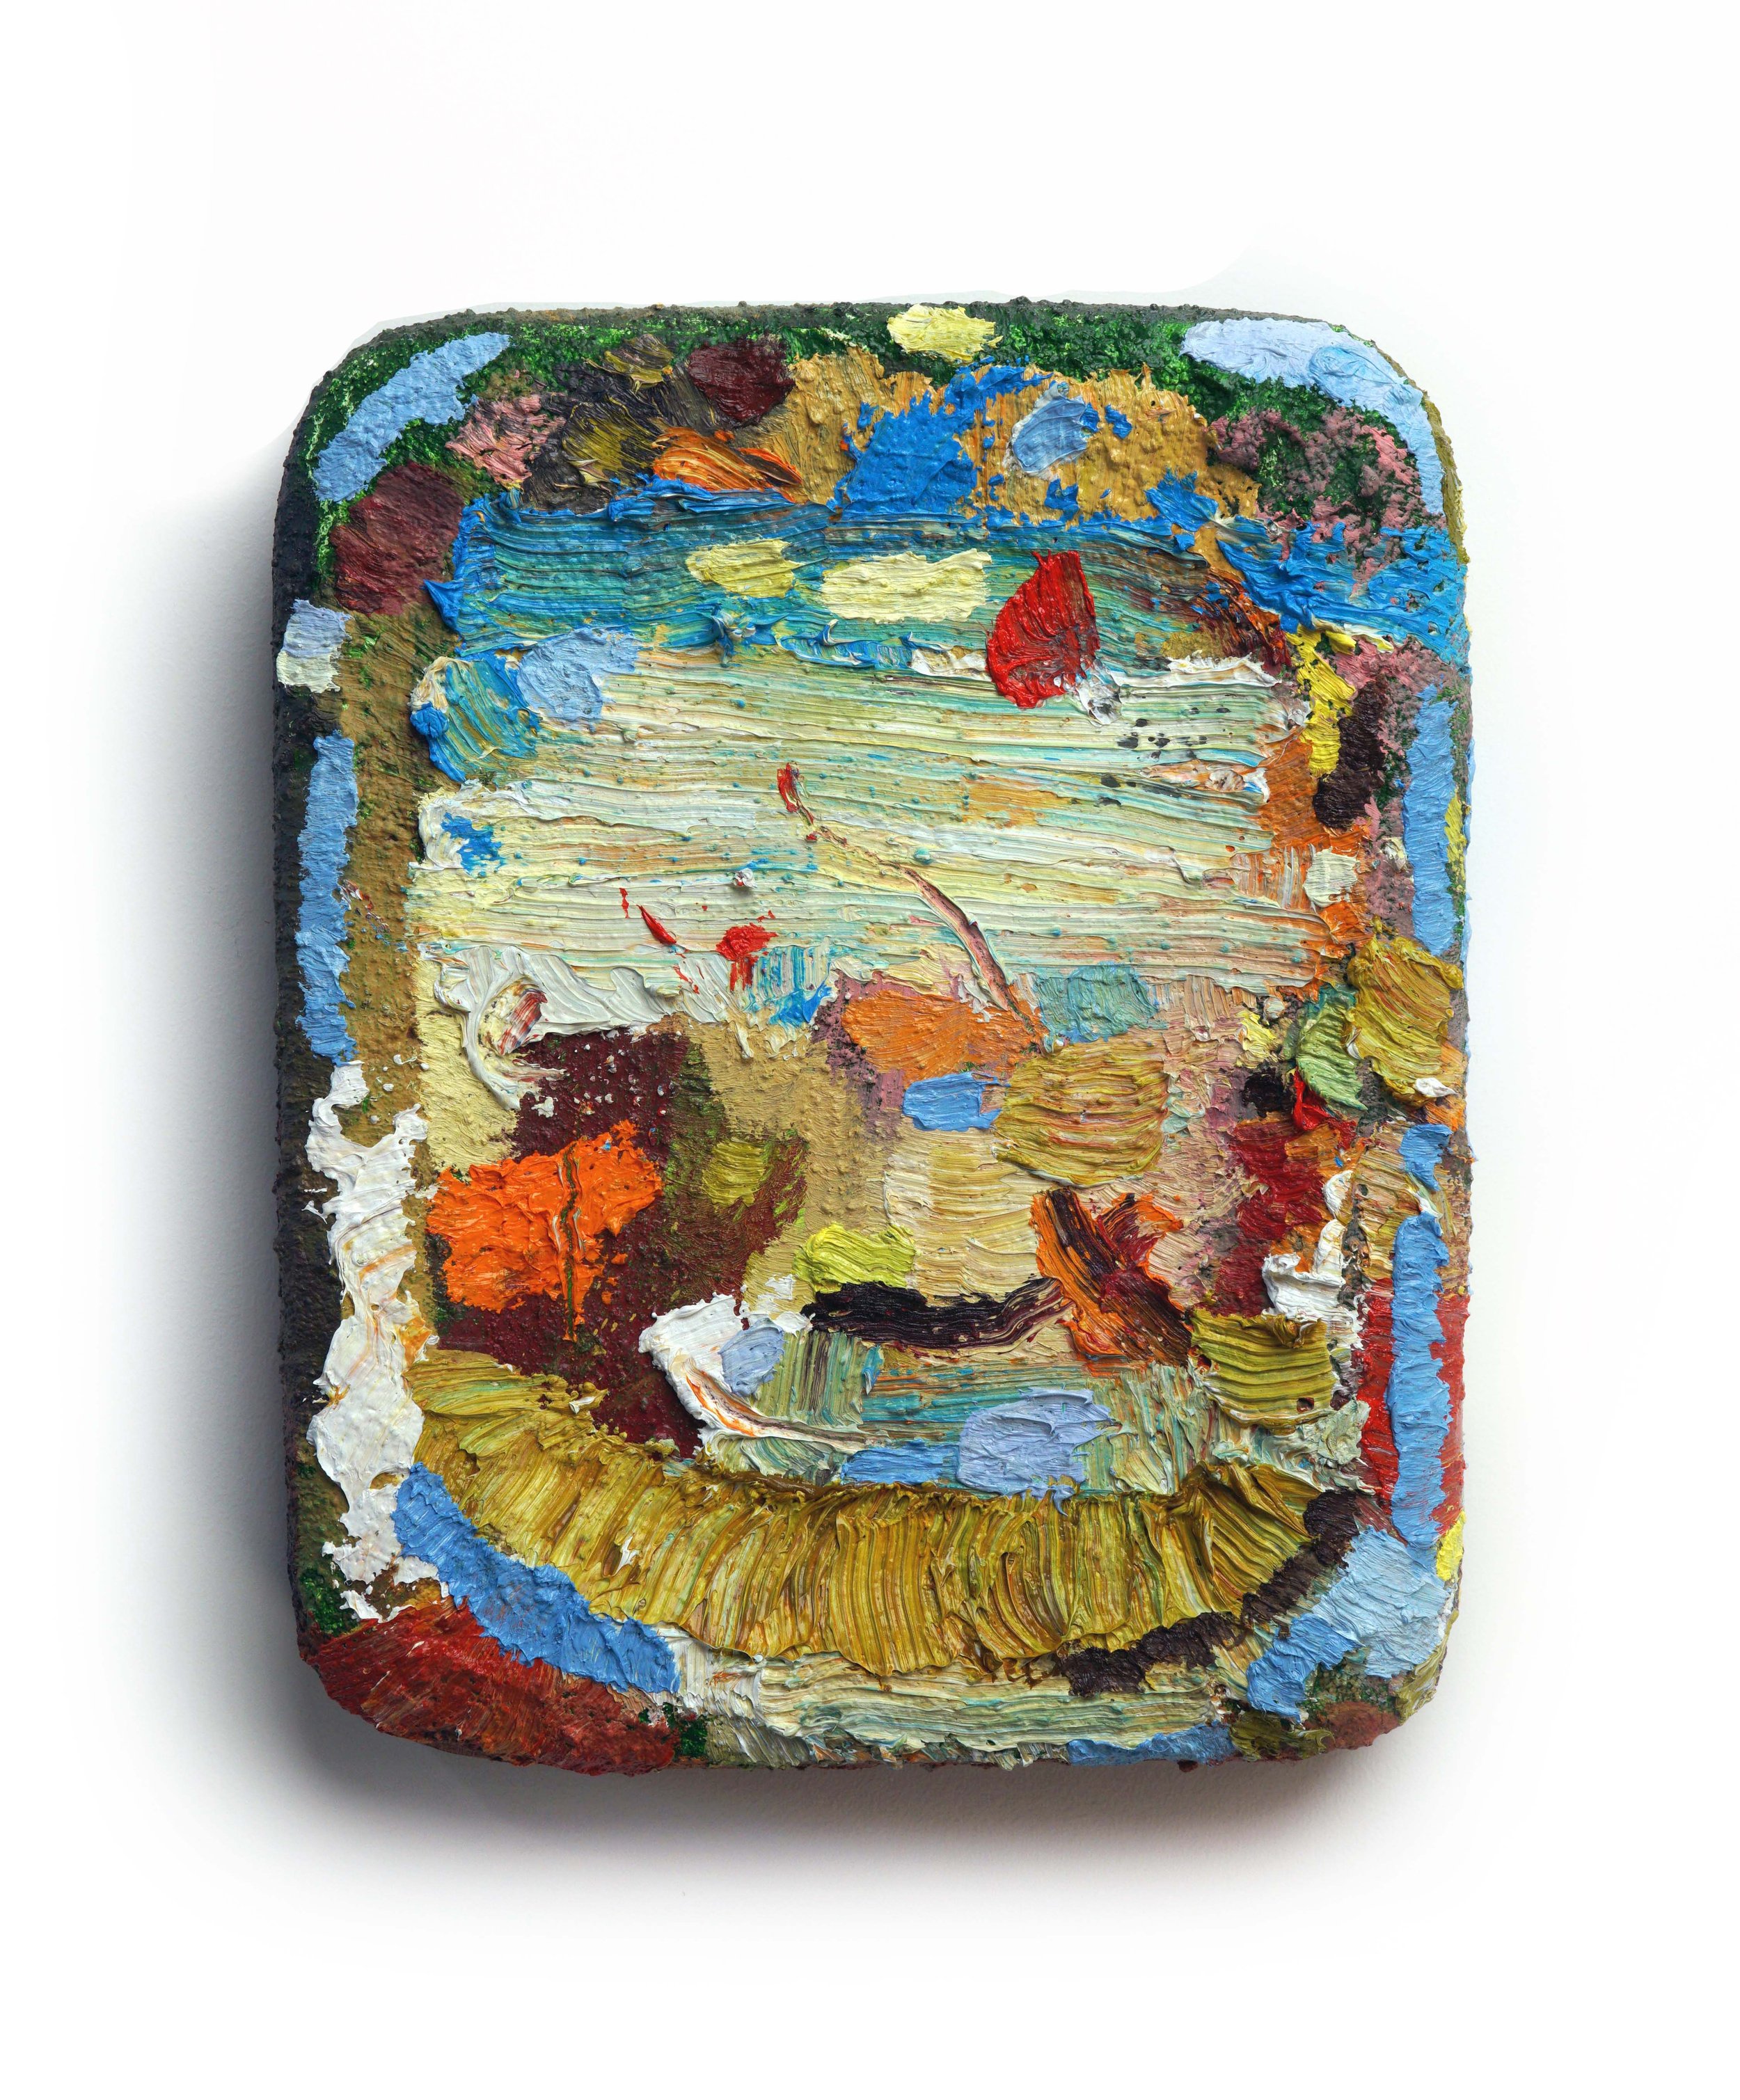 JAY HARTMANN | Tidepool, 11 x 8.5 inches /  27.9 x 21.6 cm, oil paint on shaped panel, 2021